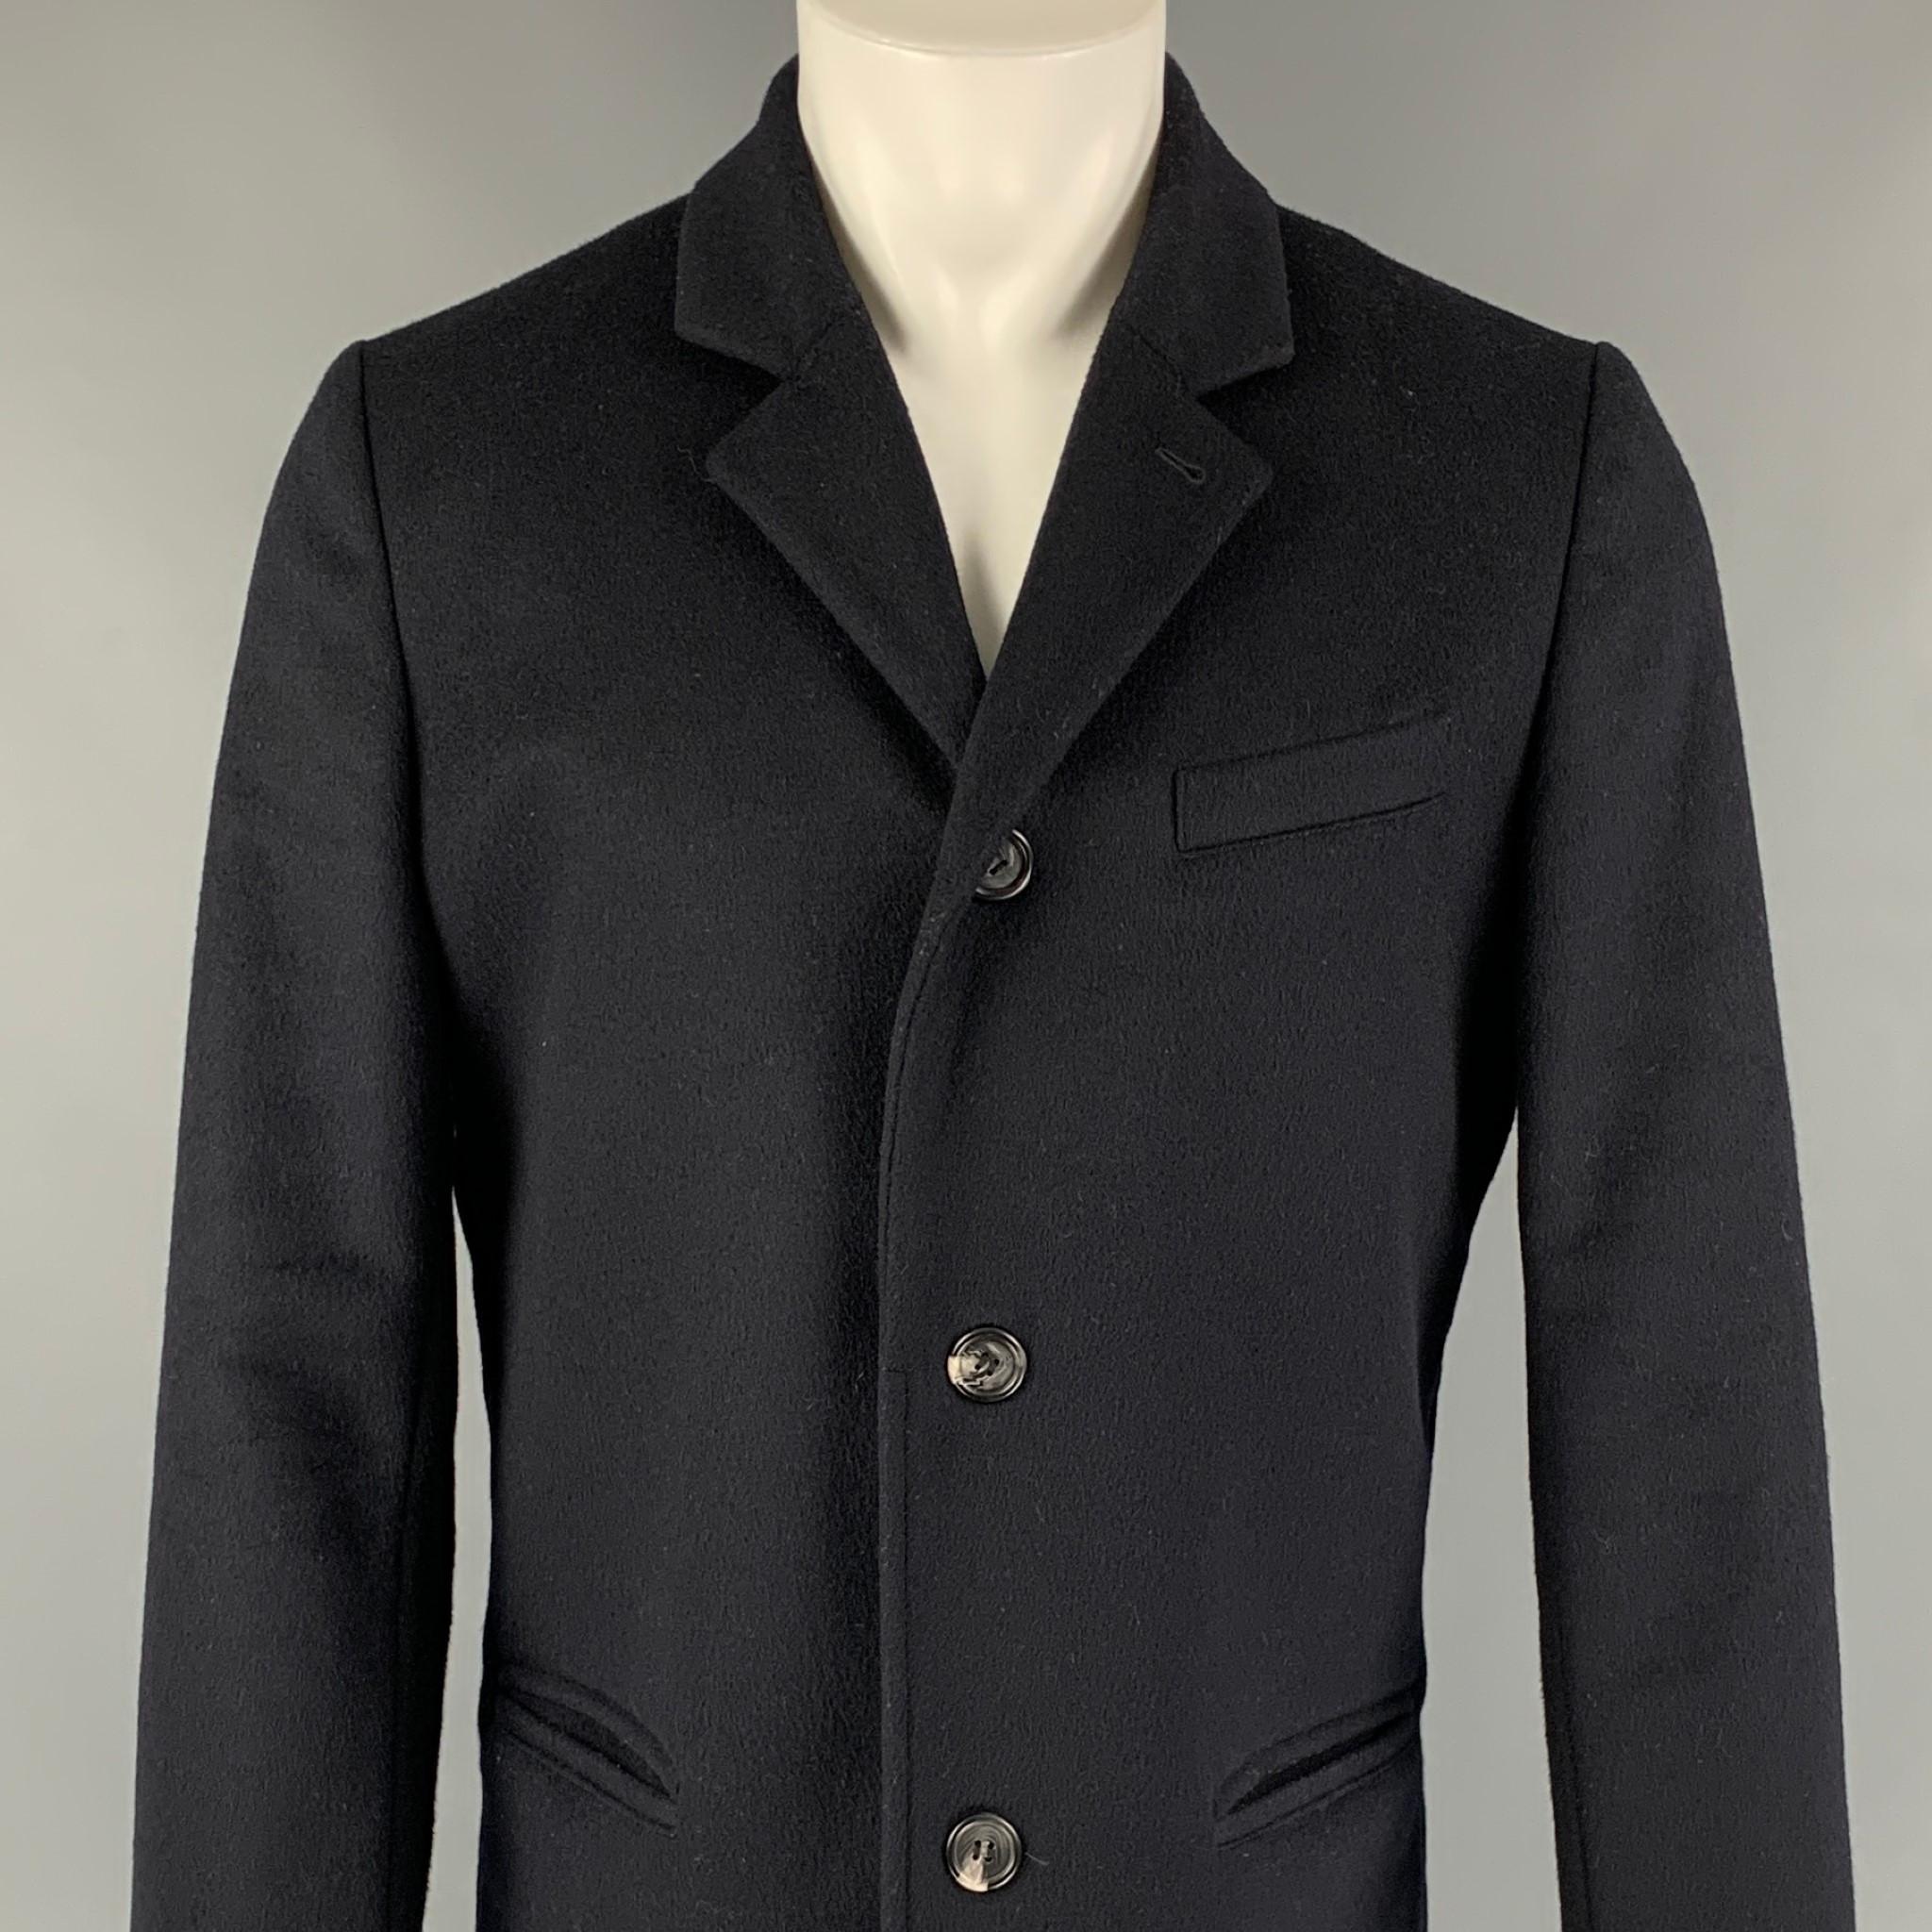 A.P.C coat comes in a navy wool featuring a notch lapel, single back vent, slit pockets, and a buttoned closure. 

Very Good Pre-Owned Condition.
Marked: L
Original Retail Price: $650.00

Measurements:

Shoulder: 17.5 in.
Chest: 42 in.
Sleeve: 27